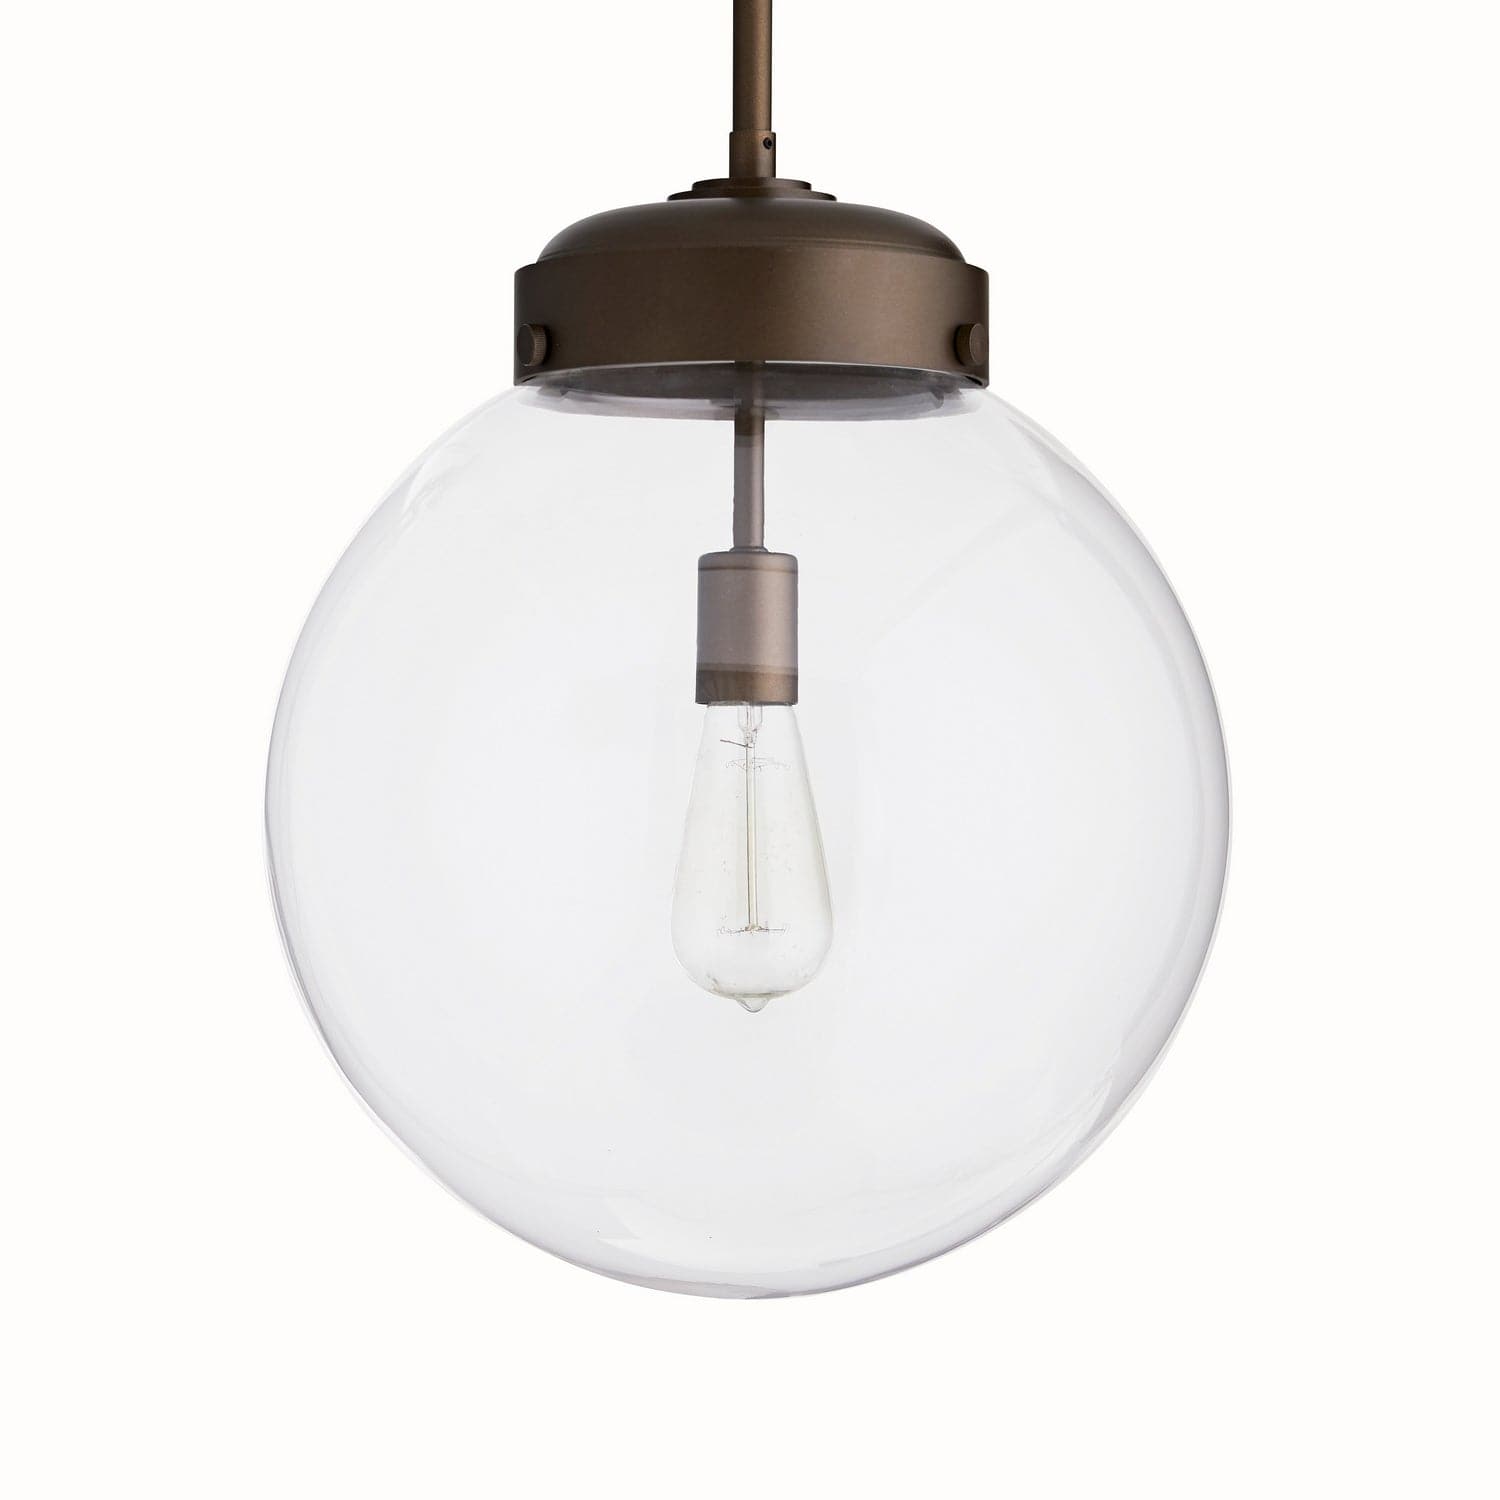 Arteriors - 49208 - One Light Outdoor Pendant - Reeves - Aged Brass